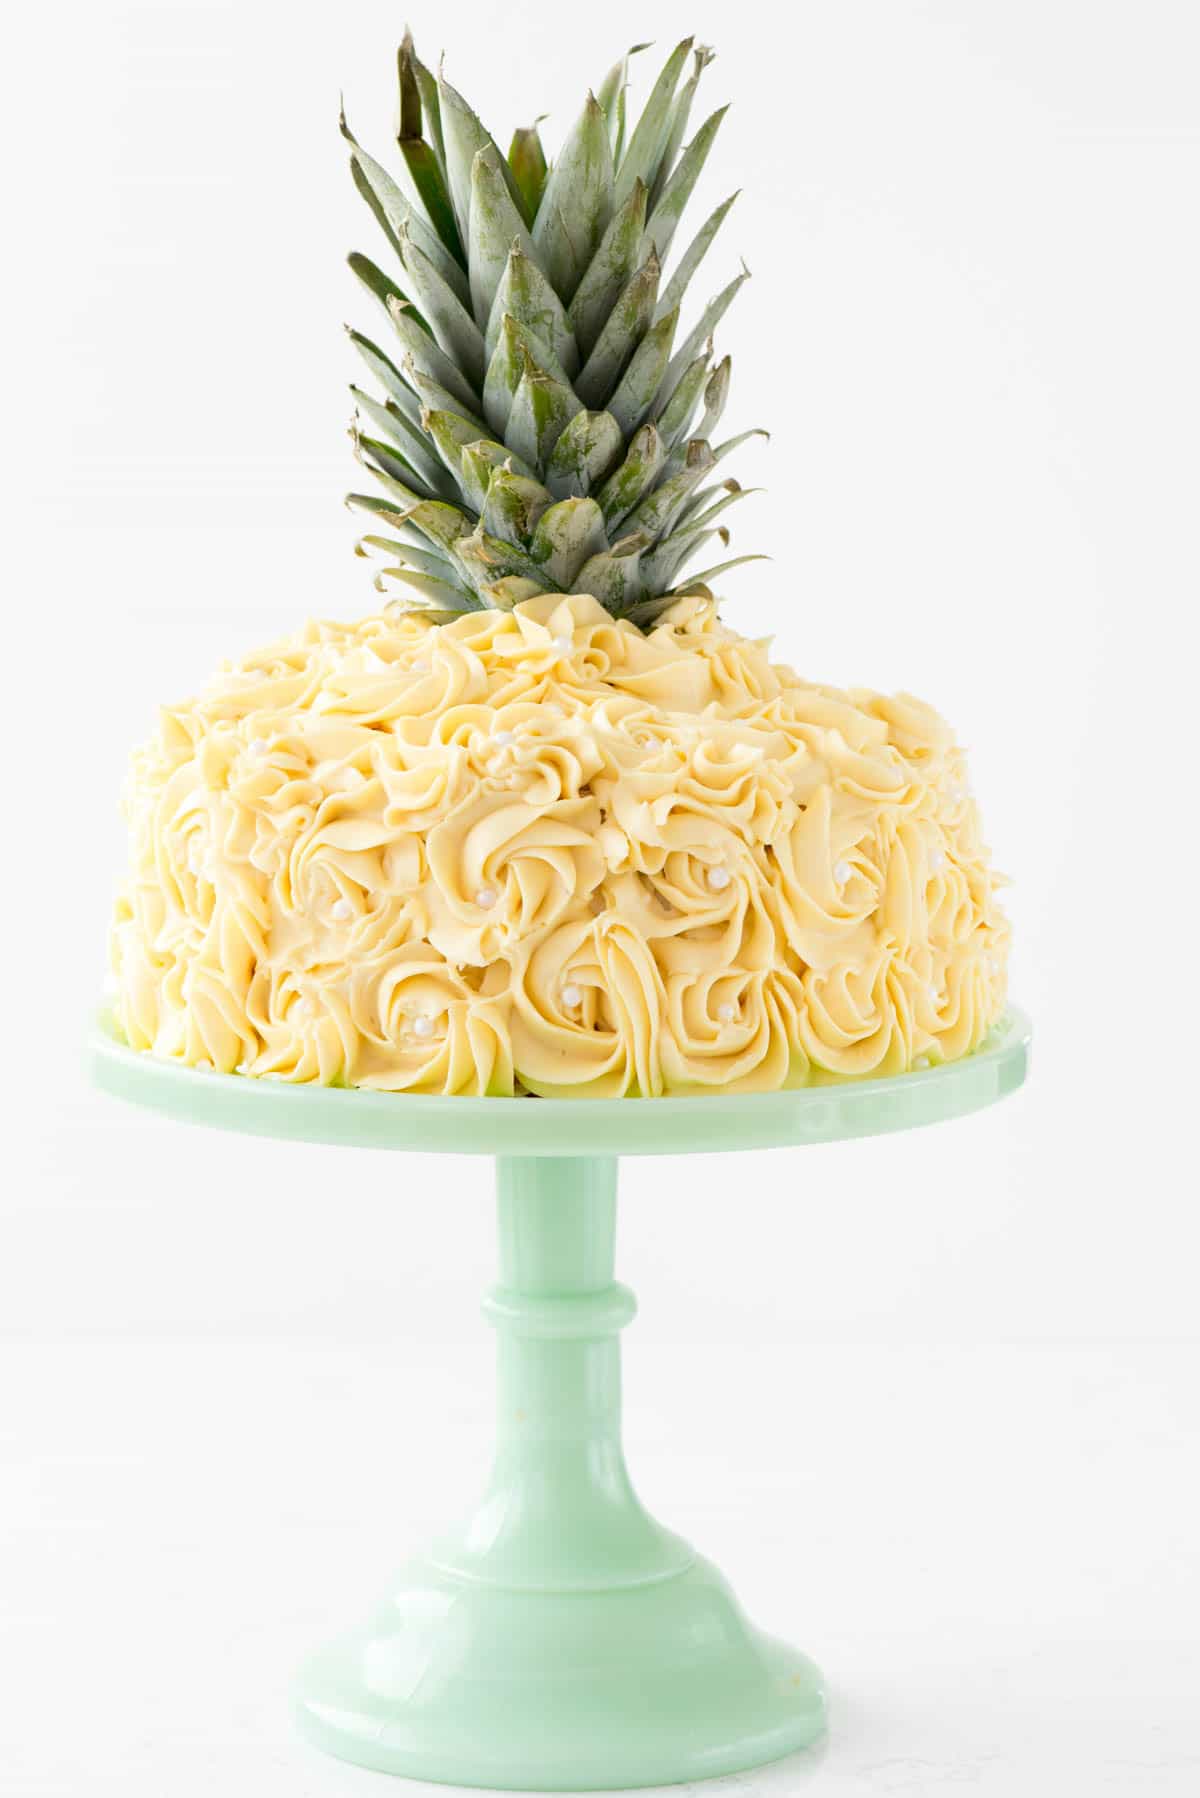 Pineapple Cake - this is the EASY way to make a pineapple cake for a pineapple party! Simply frost a 2-layer cake with yellow rosette swirls and you have a pineapple cake EASILY!